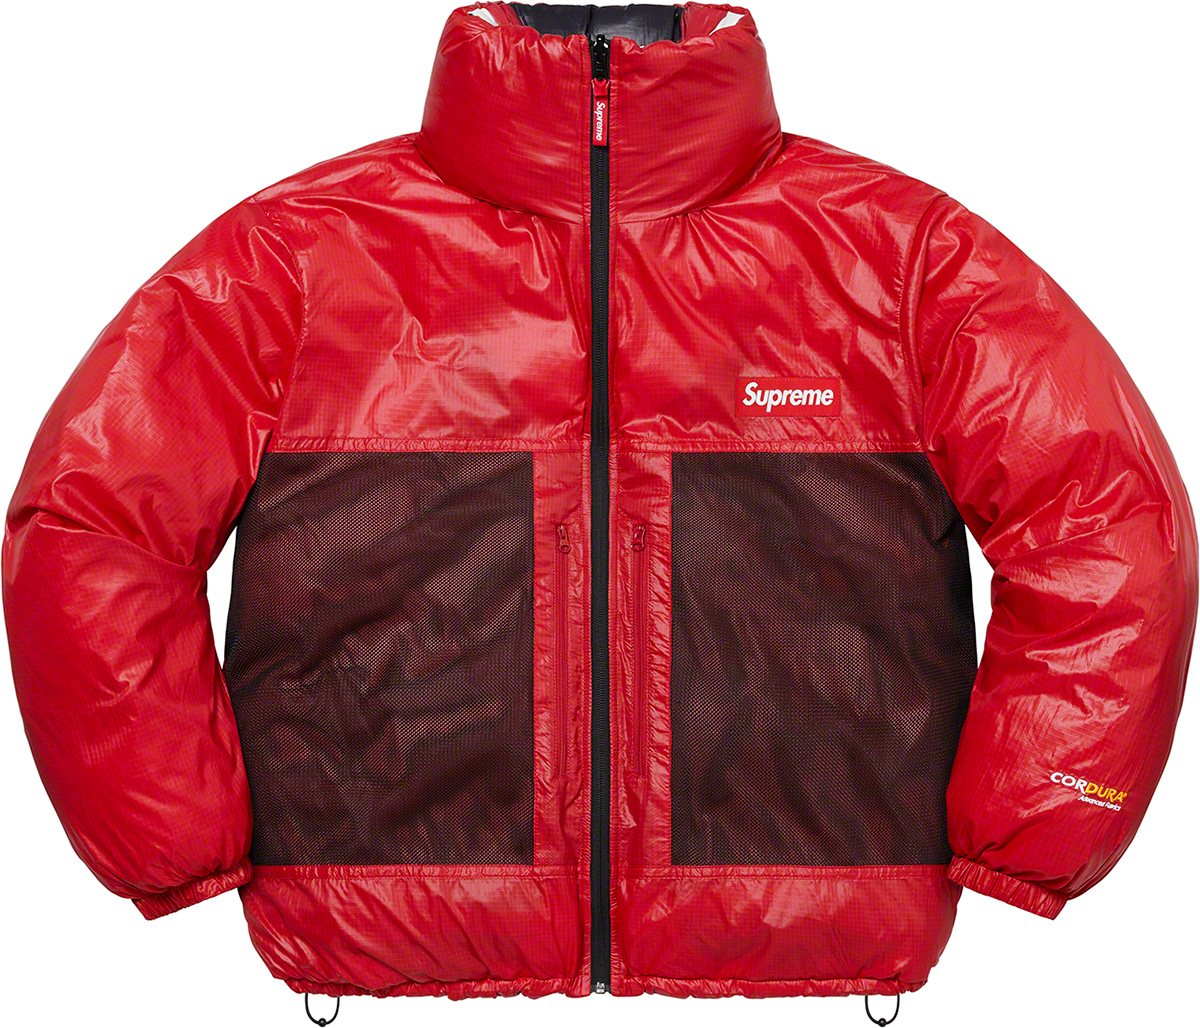 21FW/Supreme Feather weight Down jacketS 高評価 24402円引き